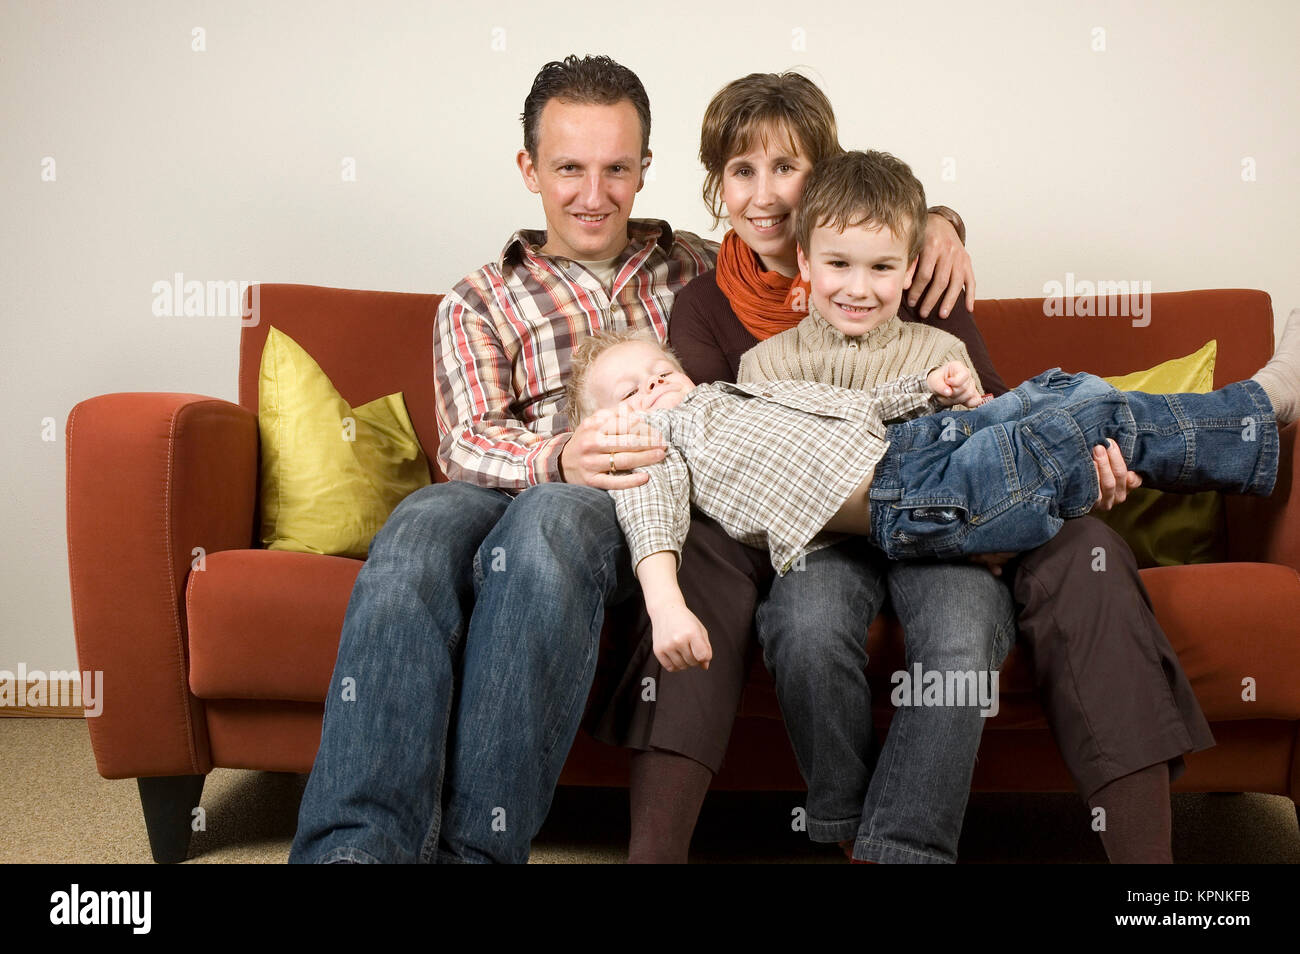 Family On A Couch 5 Stock Photo